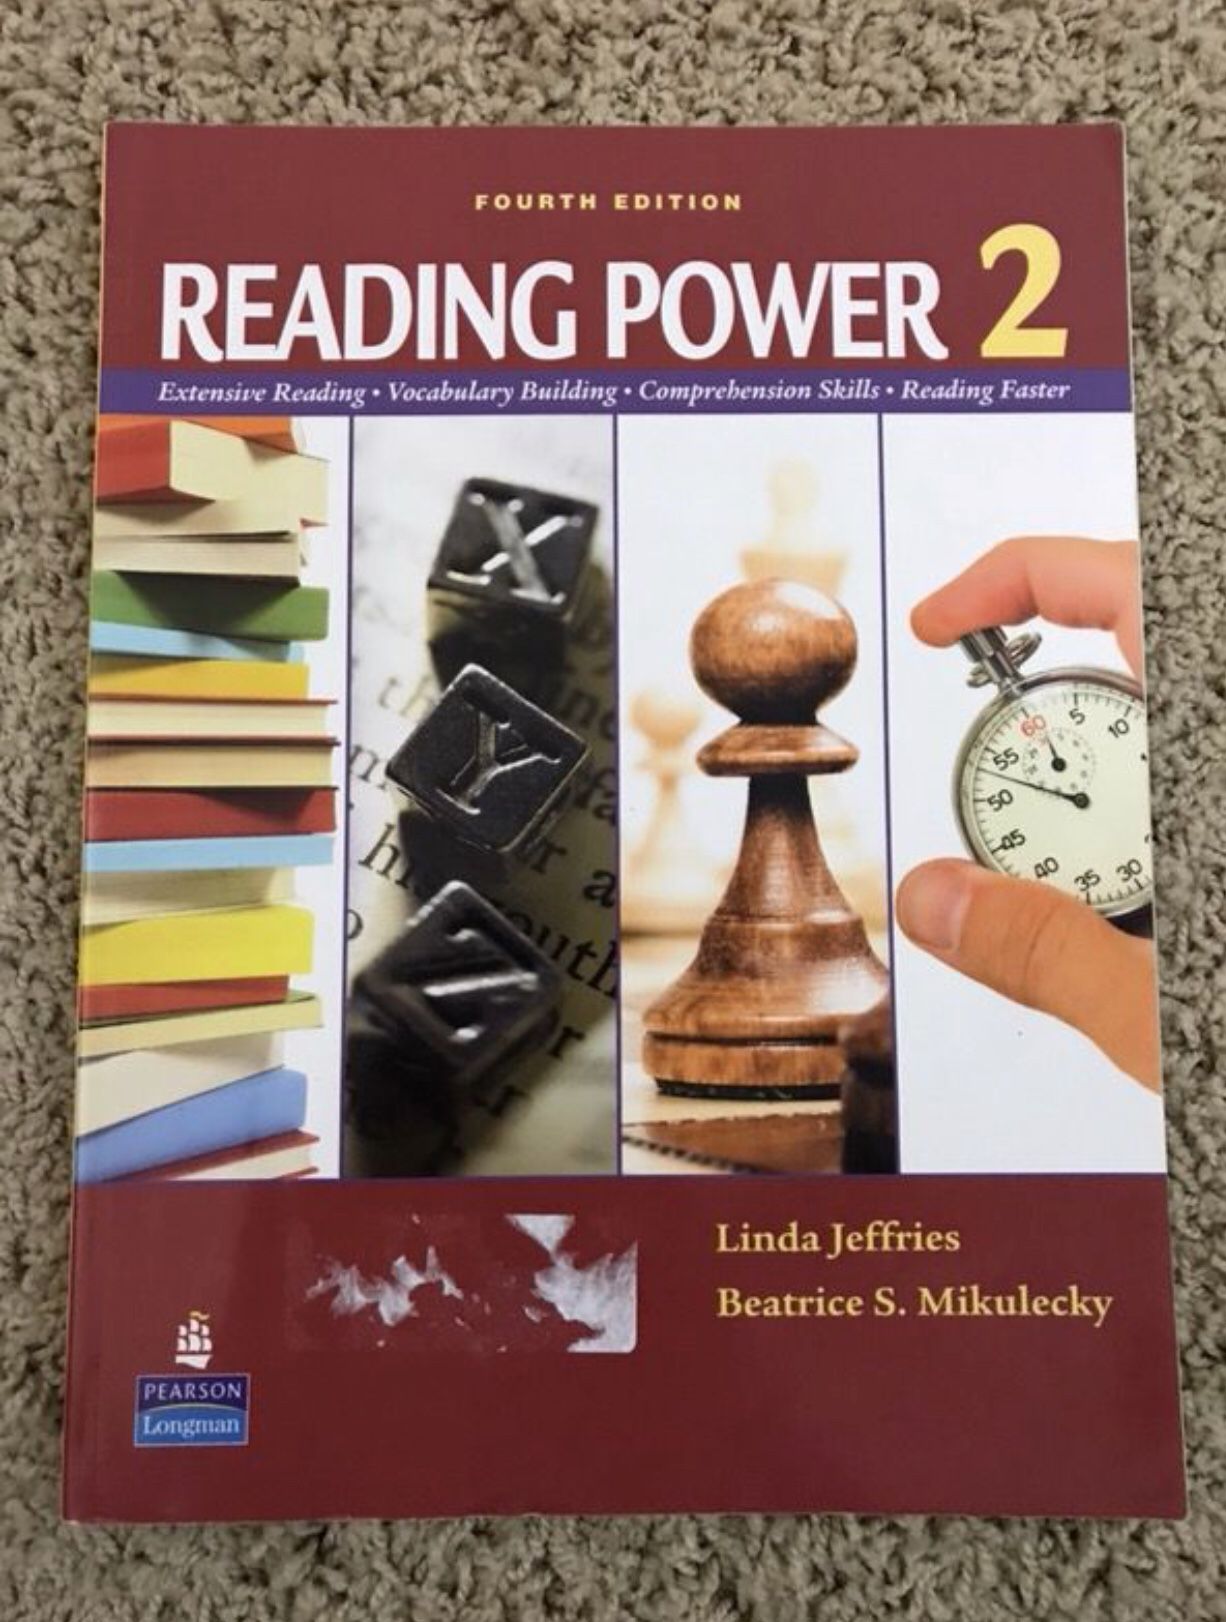 Reading Power 2 Student Book (4th Edition) 4th Edition